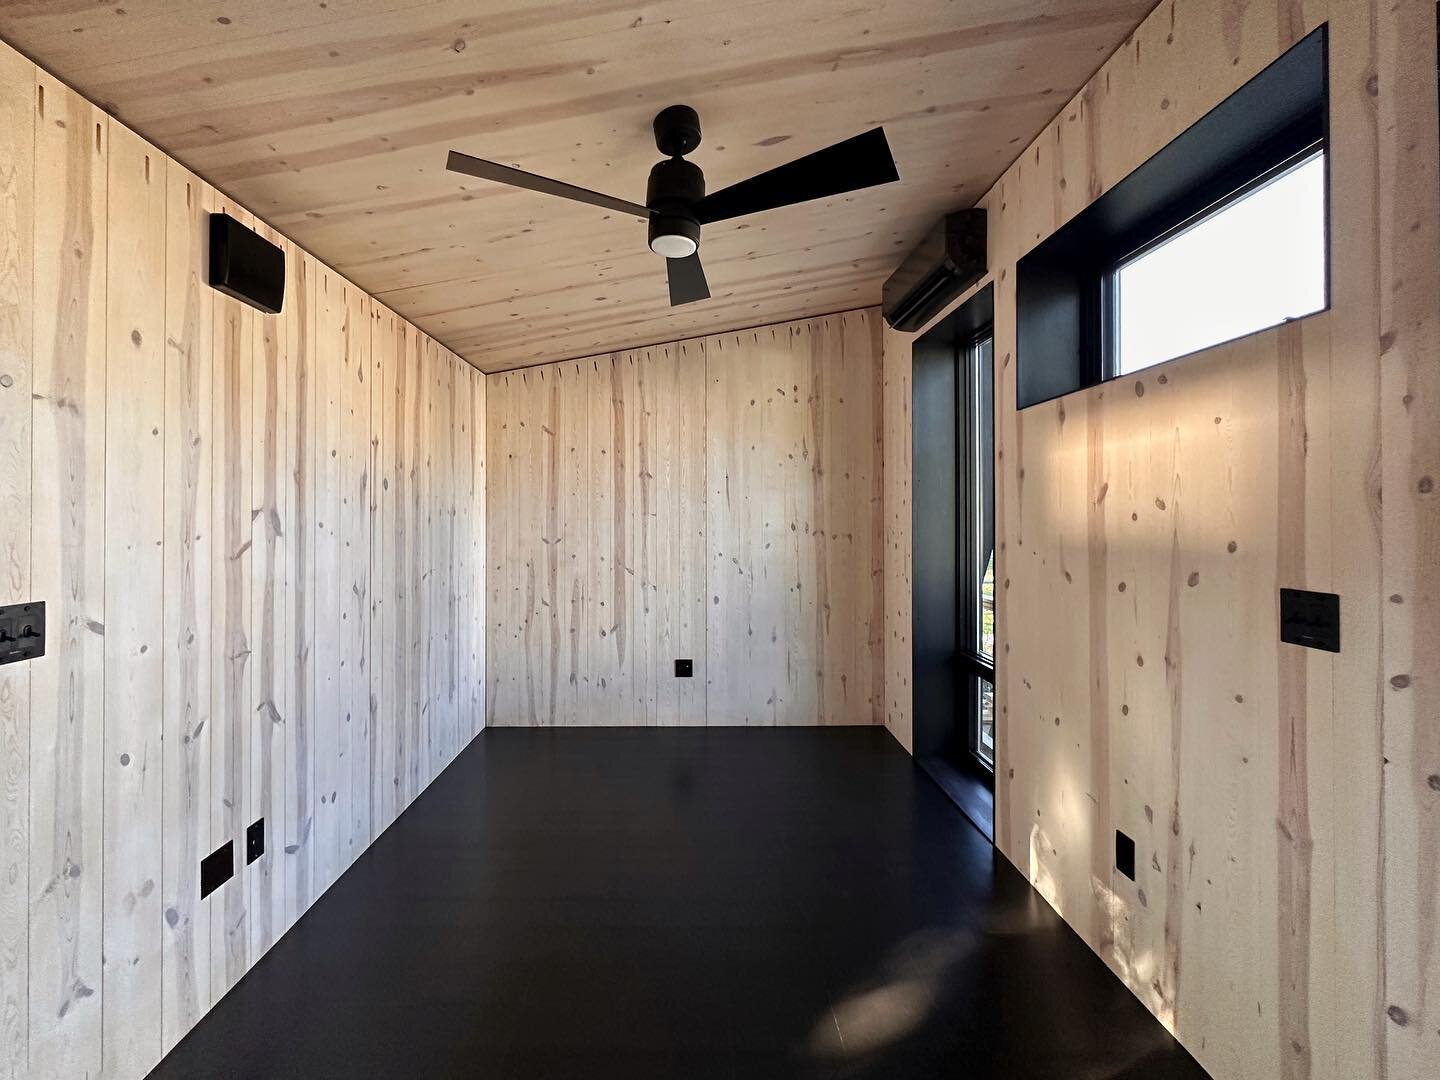 Black and whitewash

How would you like to work from our CLT office ADU?

#thisisMESA

#mesarchitecture #durangocolorado #coloradoarchitecture #durangoarchitects #designbuild #crosslaminatedtimber #wfh #homeoffice